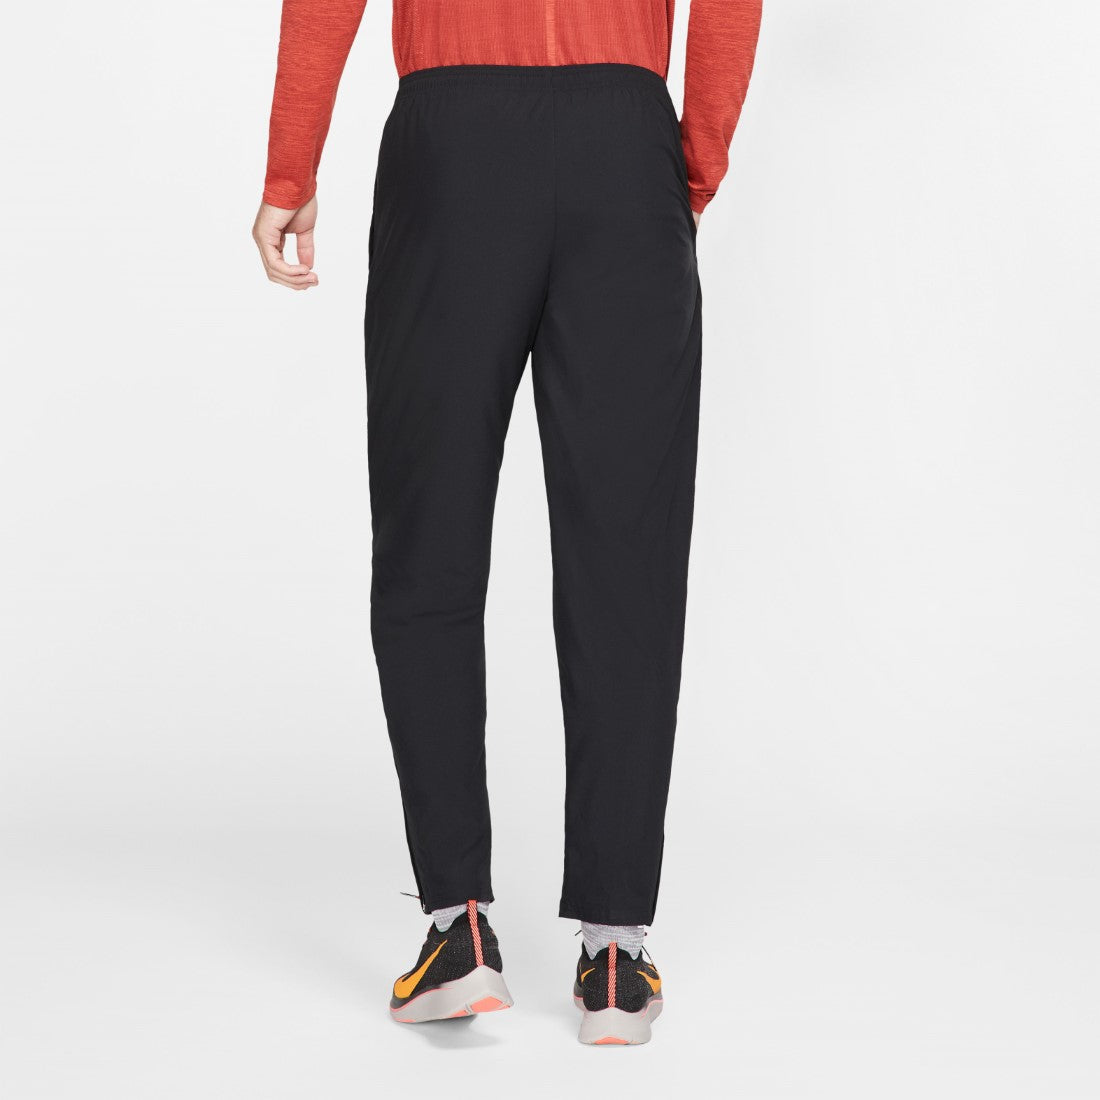 Woven Running Trousers